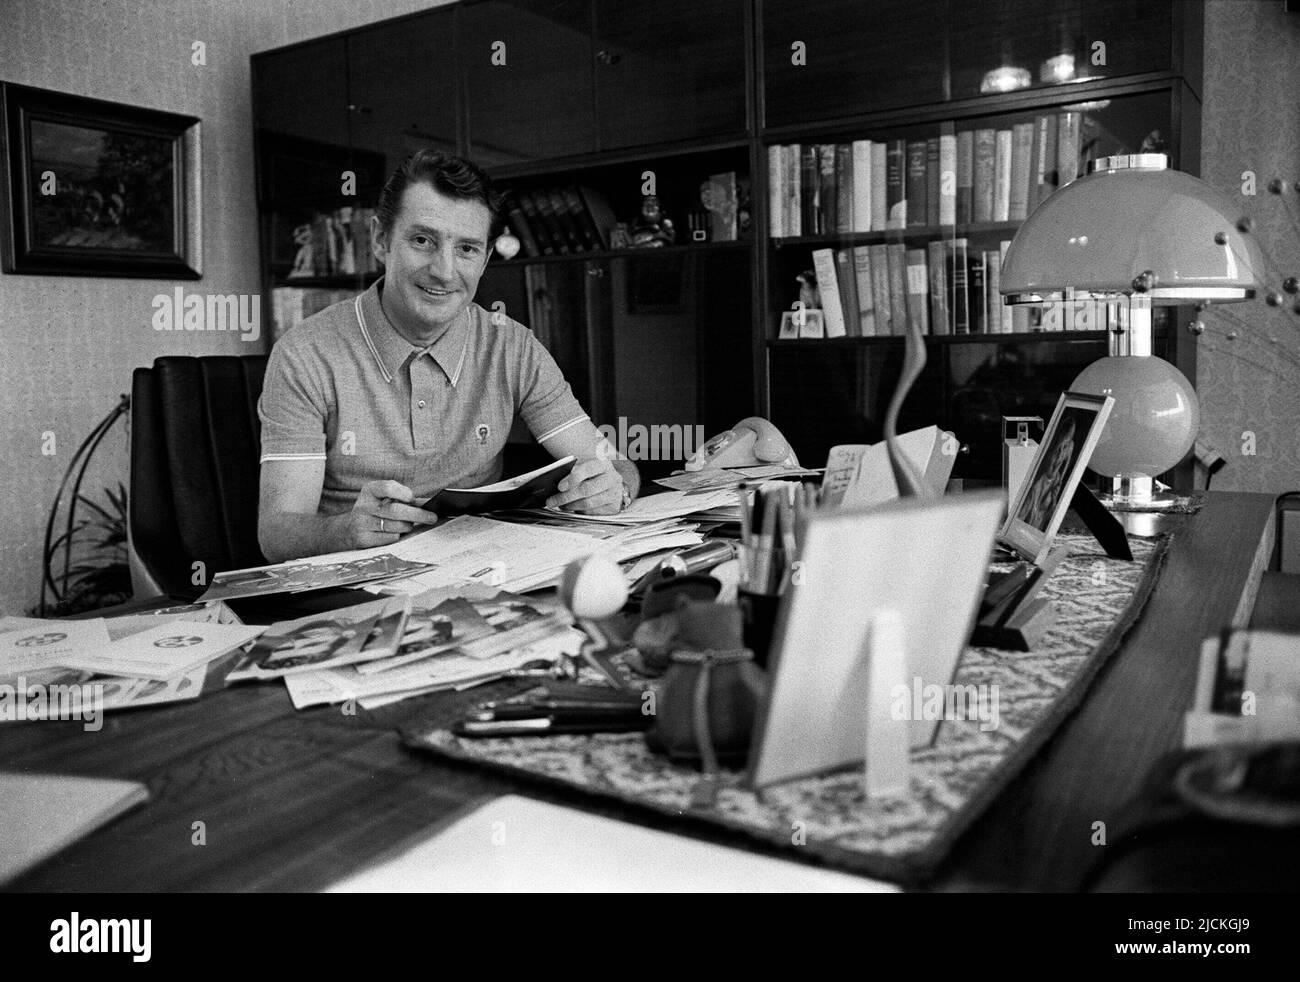 ARCHIVE PHOTO: Soccer legend Fritz Walter died 20 years ago, on June 17, 2002, 06SN FRITZWALTER.jpg Fritz WALTER, Germany, former soccer player, soccer world champion of 1954, sitting at the desk in his office, February 25, 1990. Stock Photo